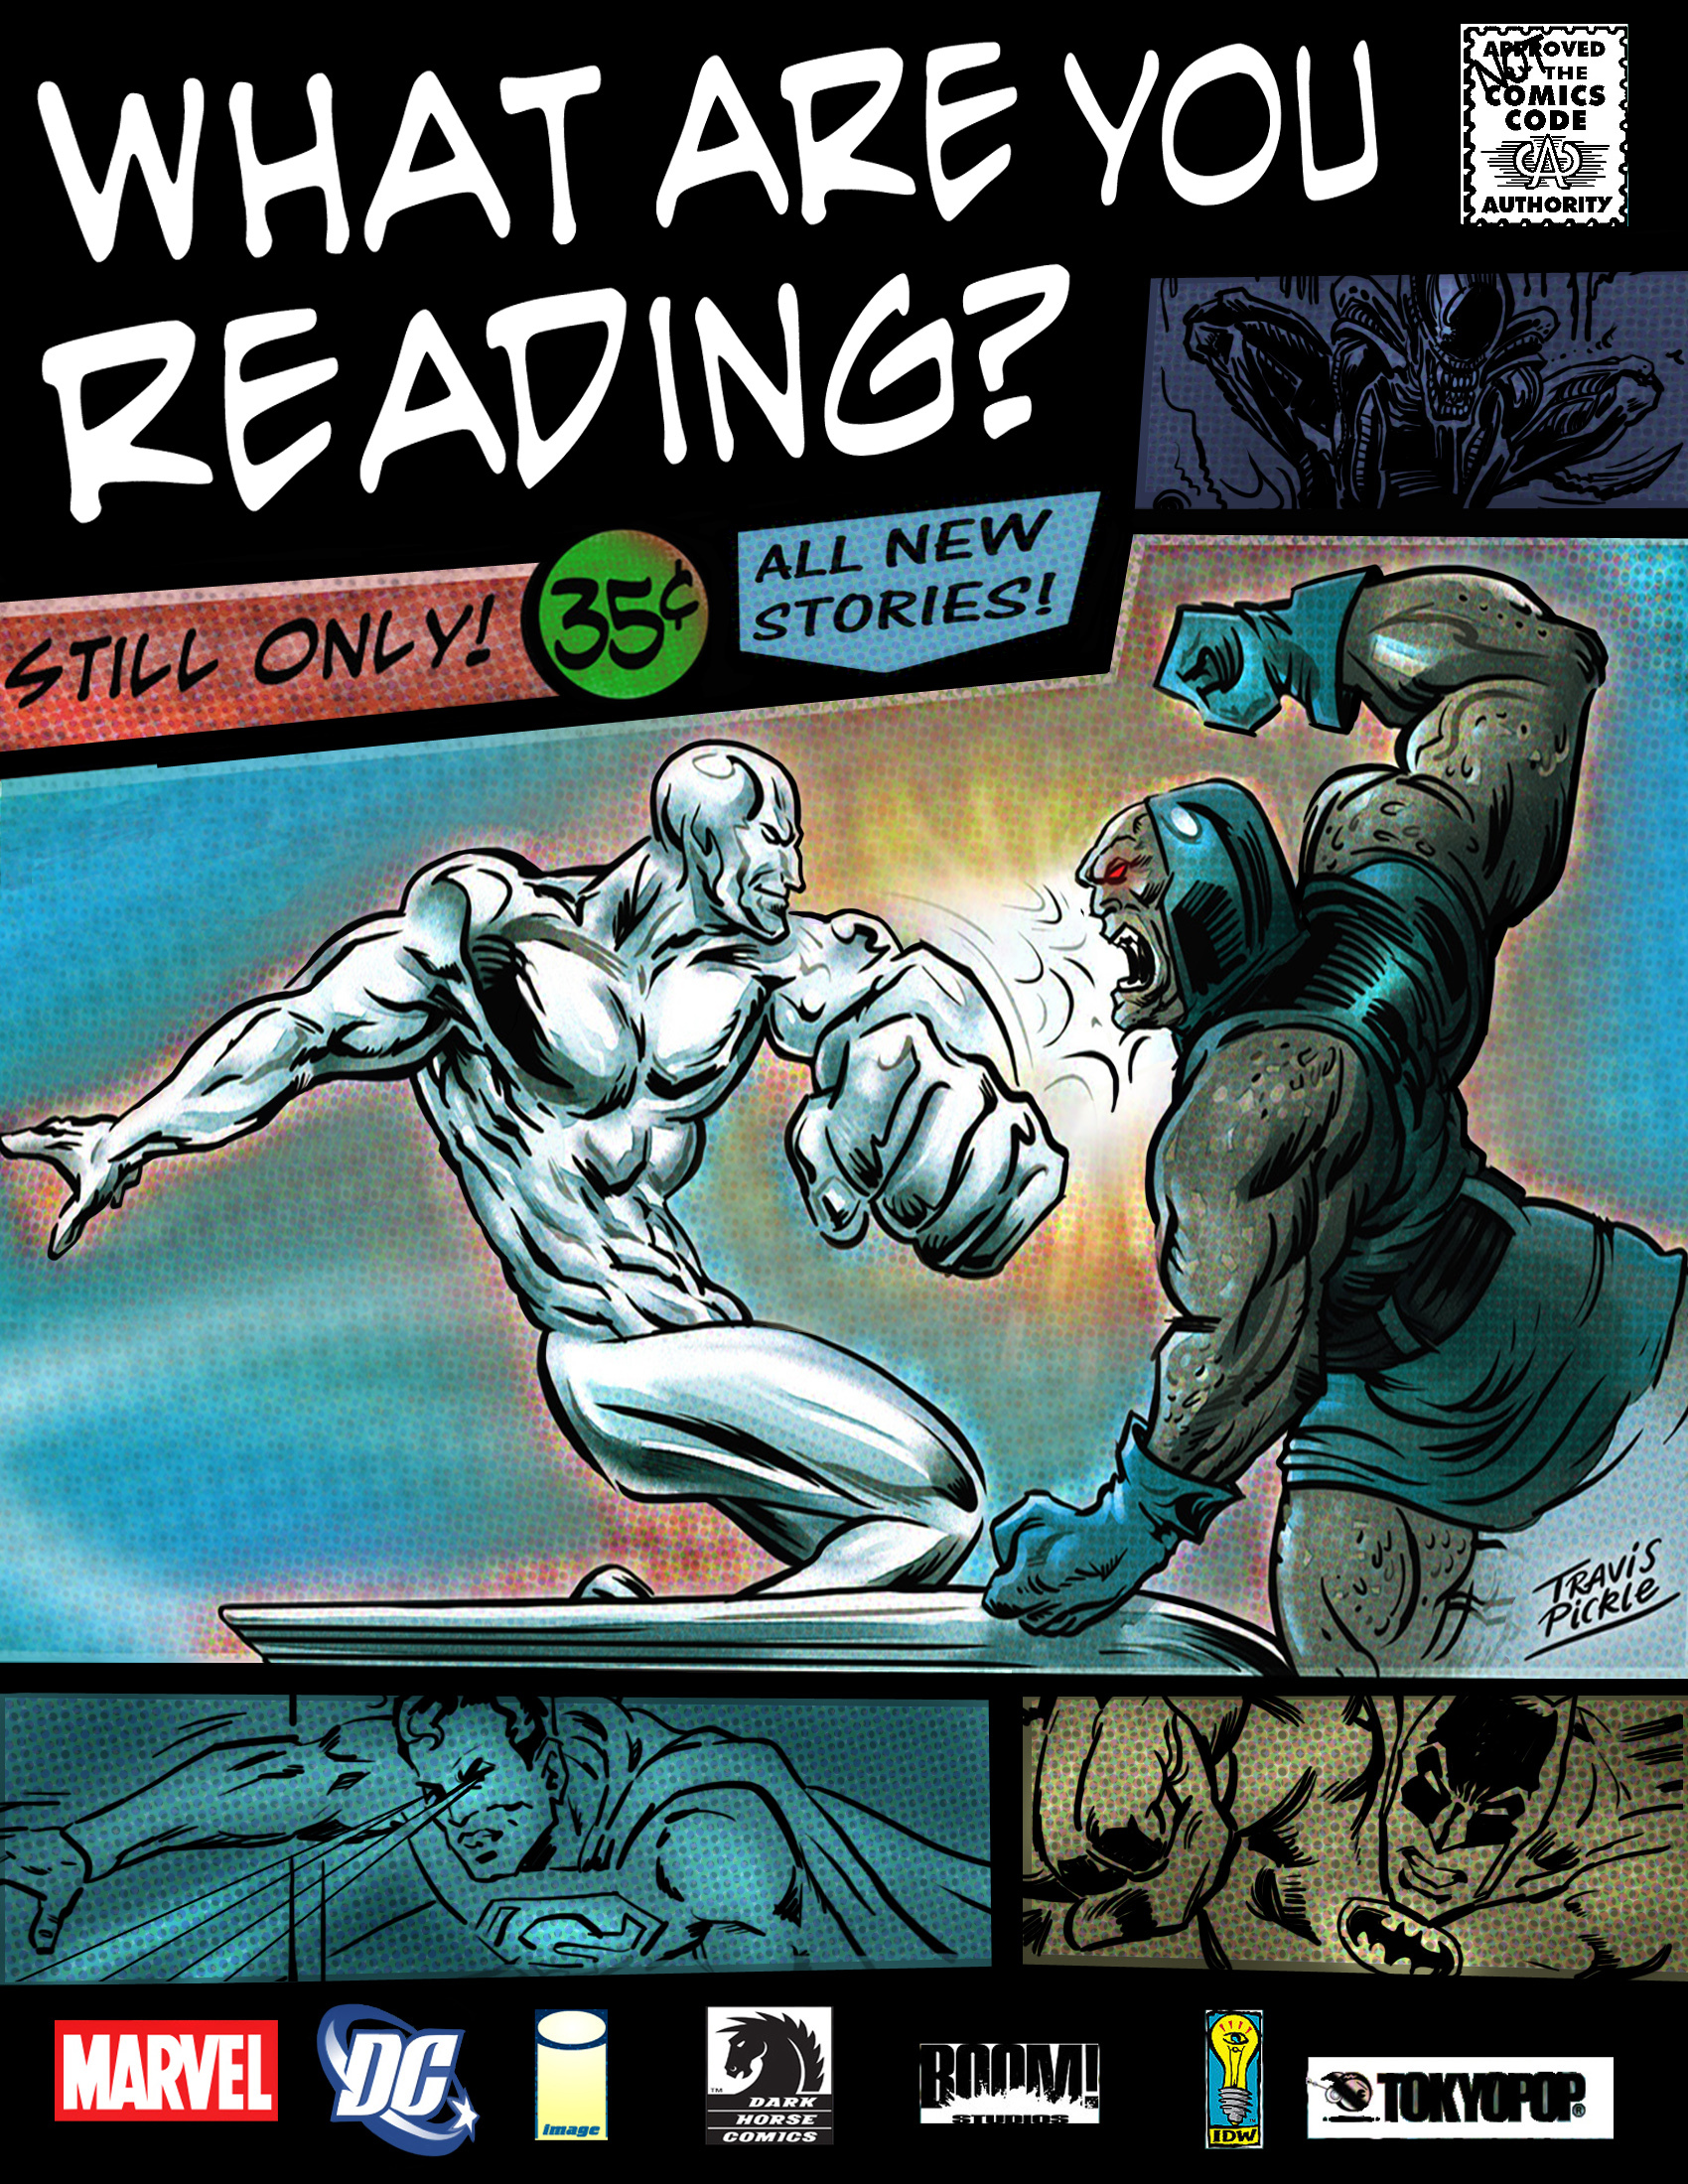 What Are You Reading? Volume 8 Issue 21